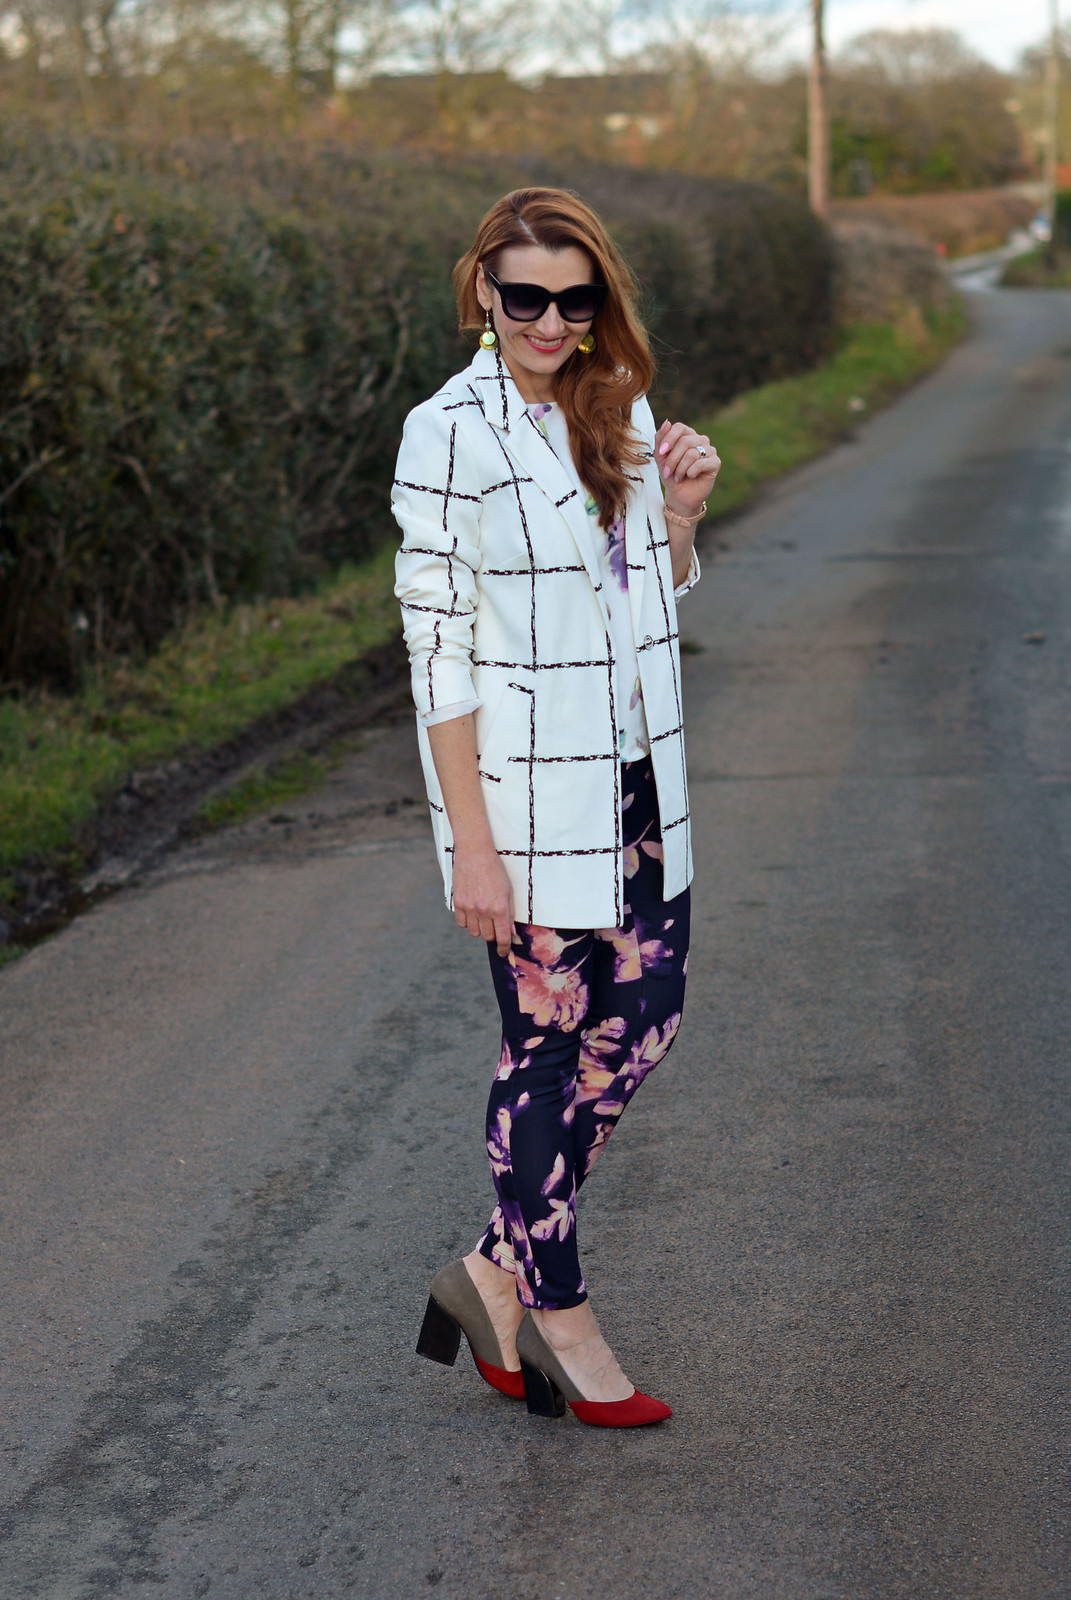 Spring style: White check coat with floral top and leggings